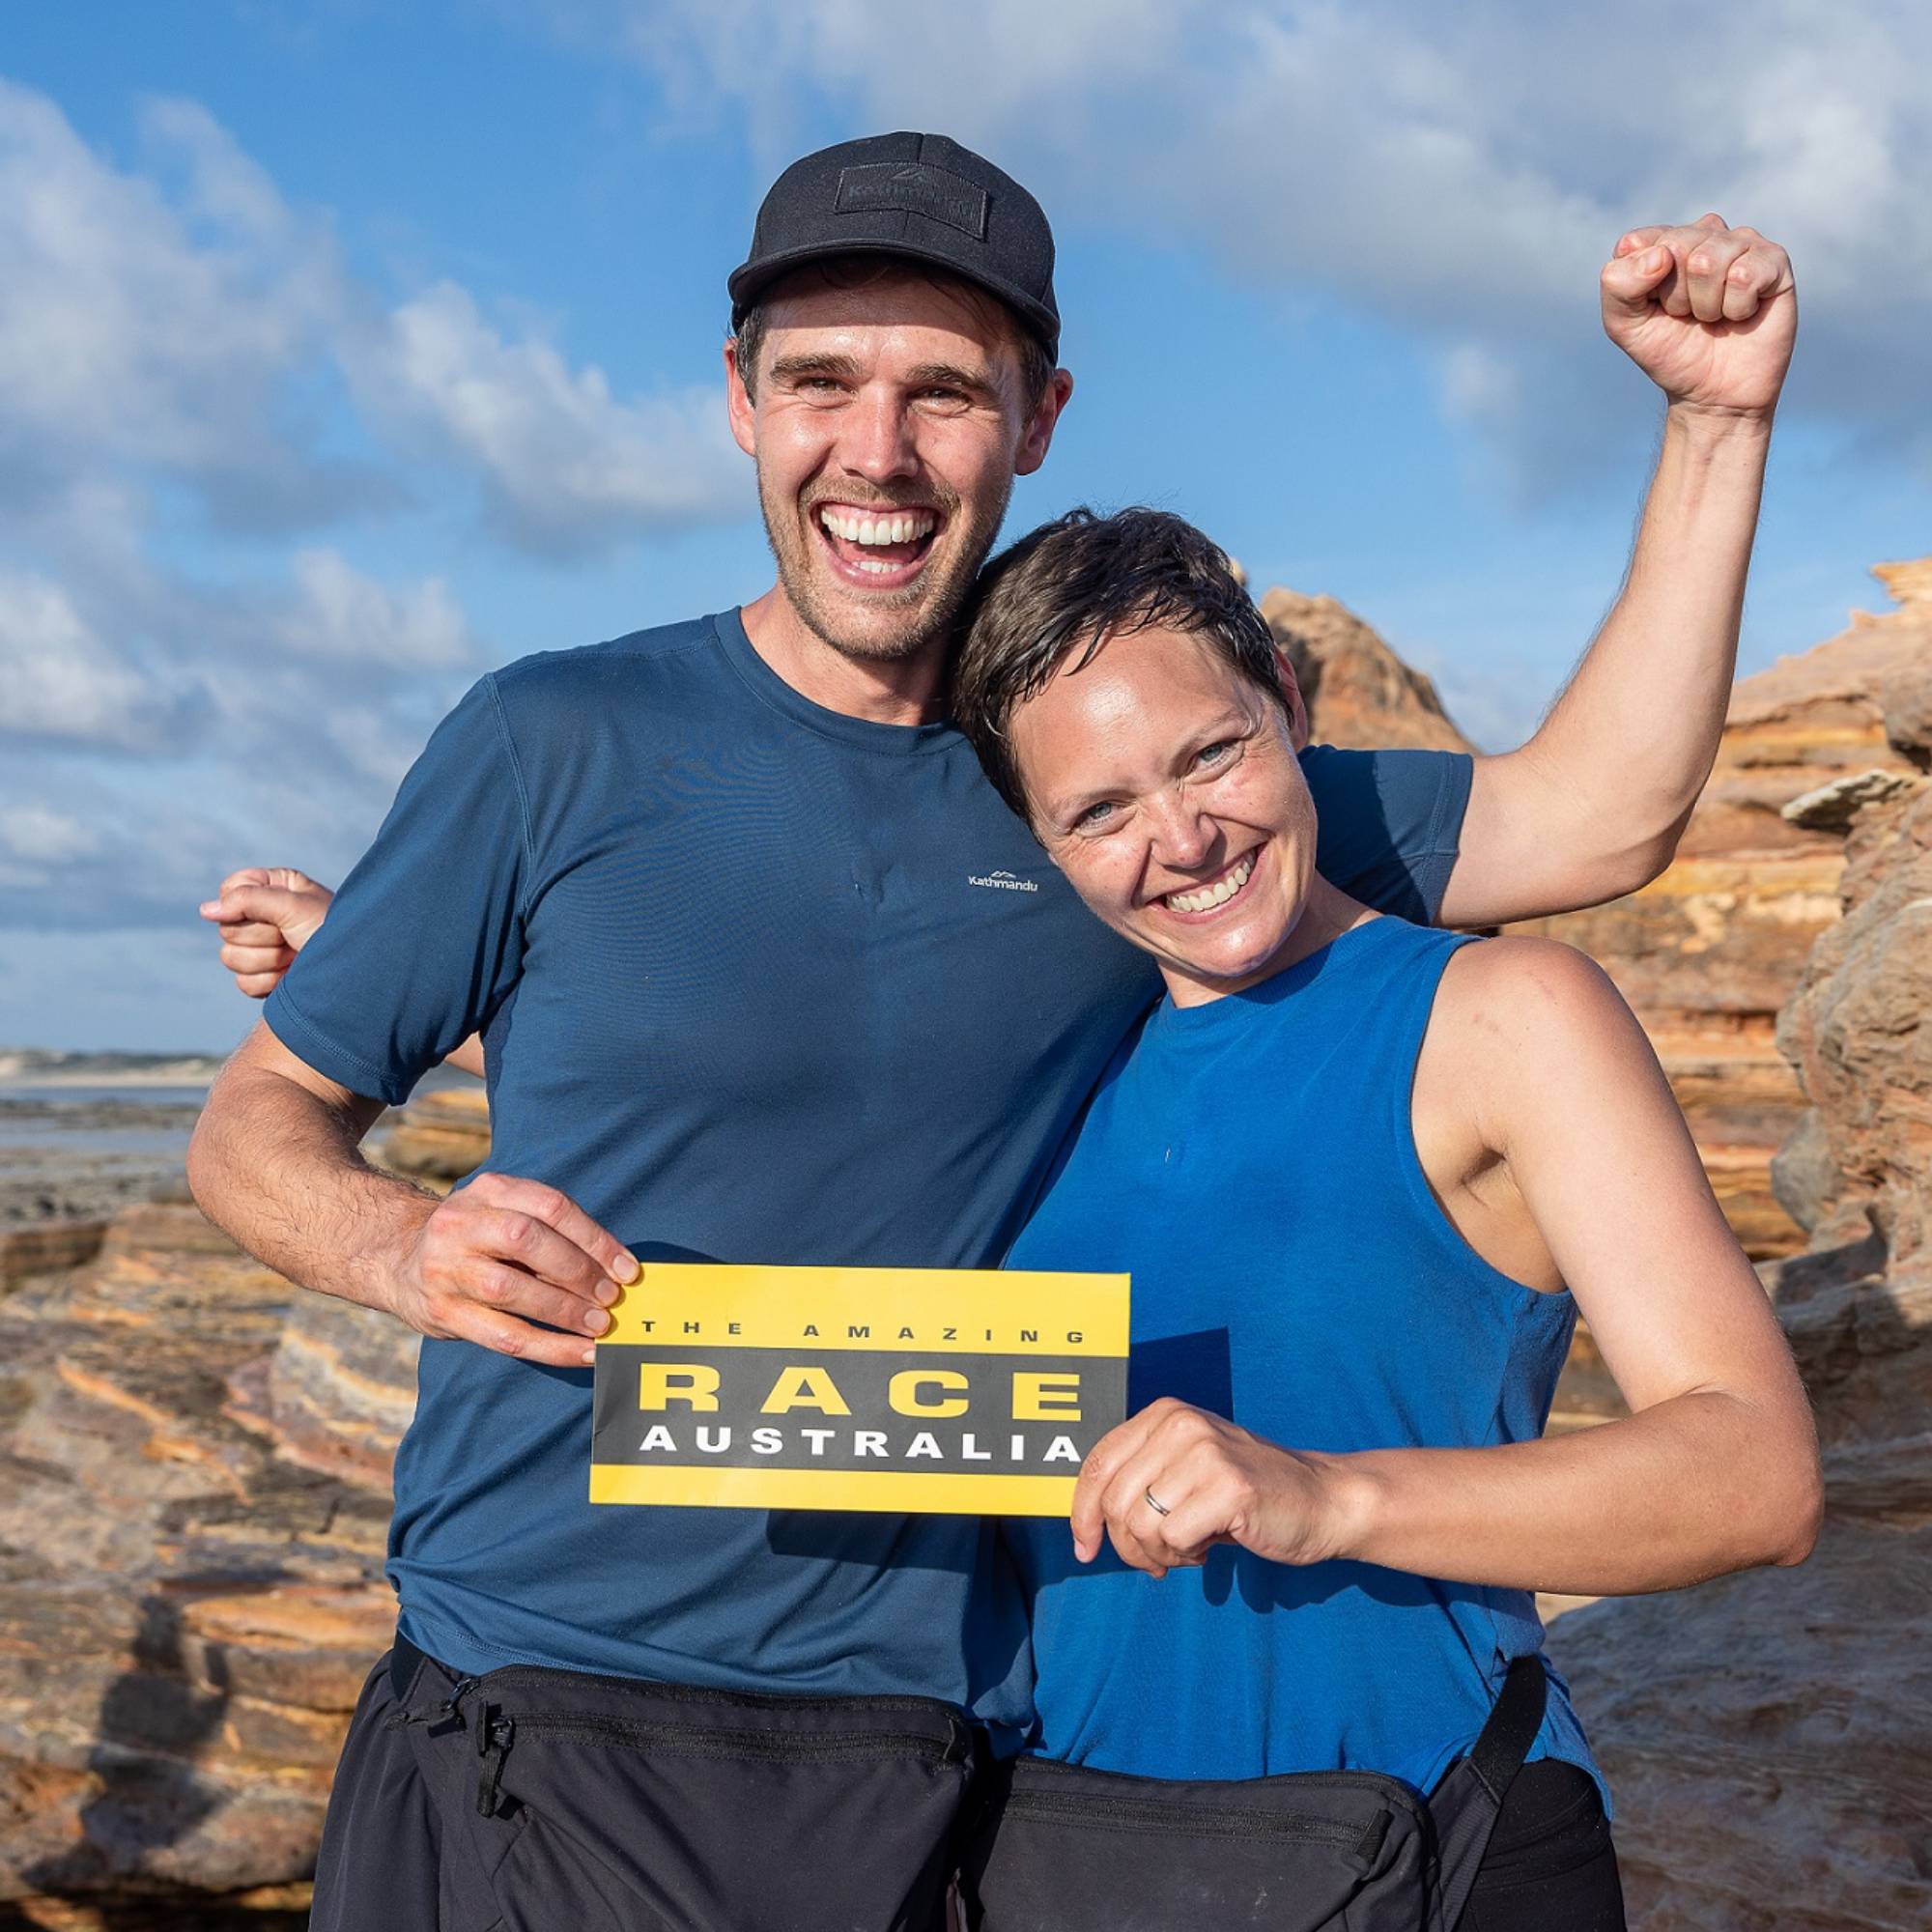 Heath and Toni Have Been Crowned the Winners of The Amazing Race